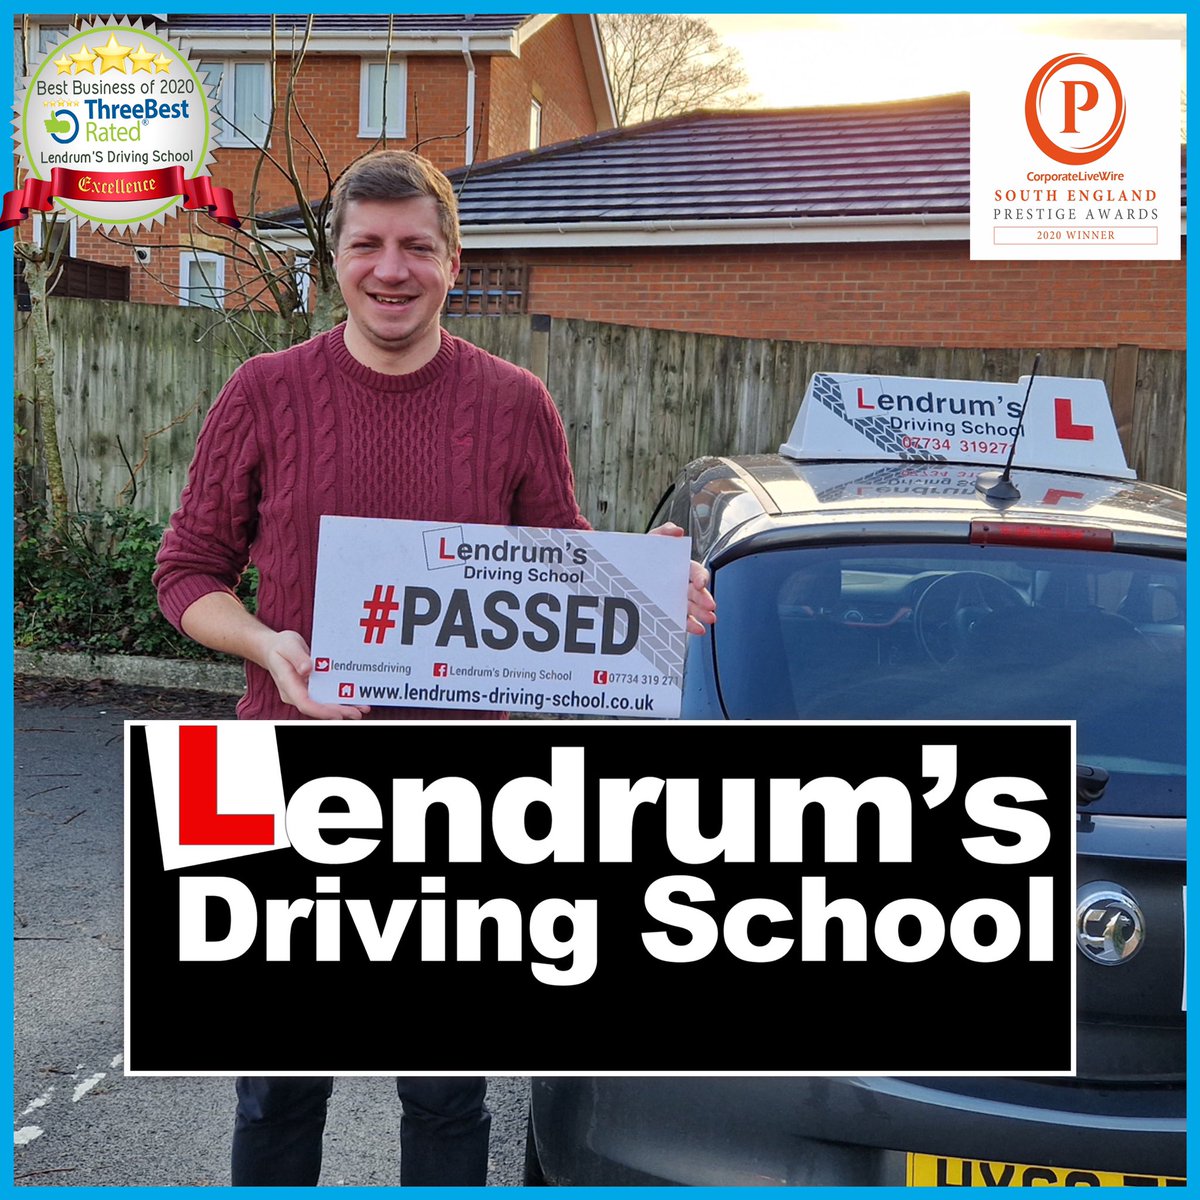 Congratulations to Adam for #passing his #drivingtest 1st time at #Southampton with #drivinginstructor Franklyn